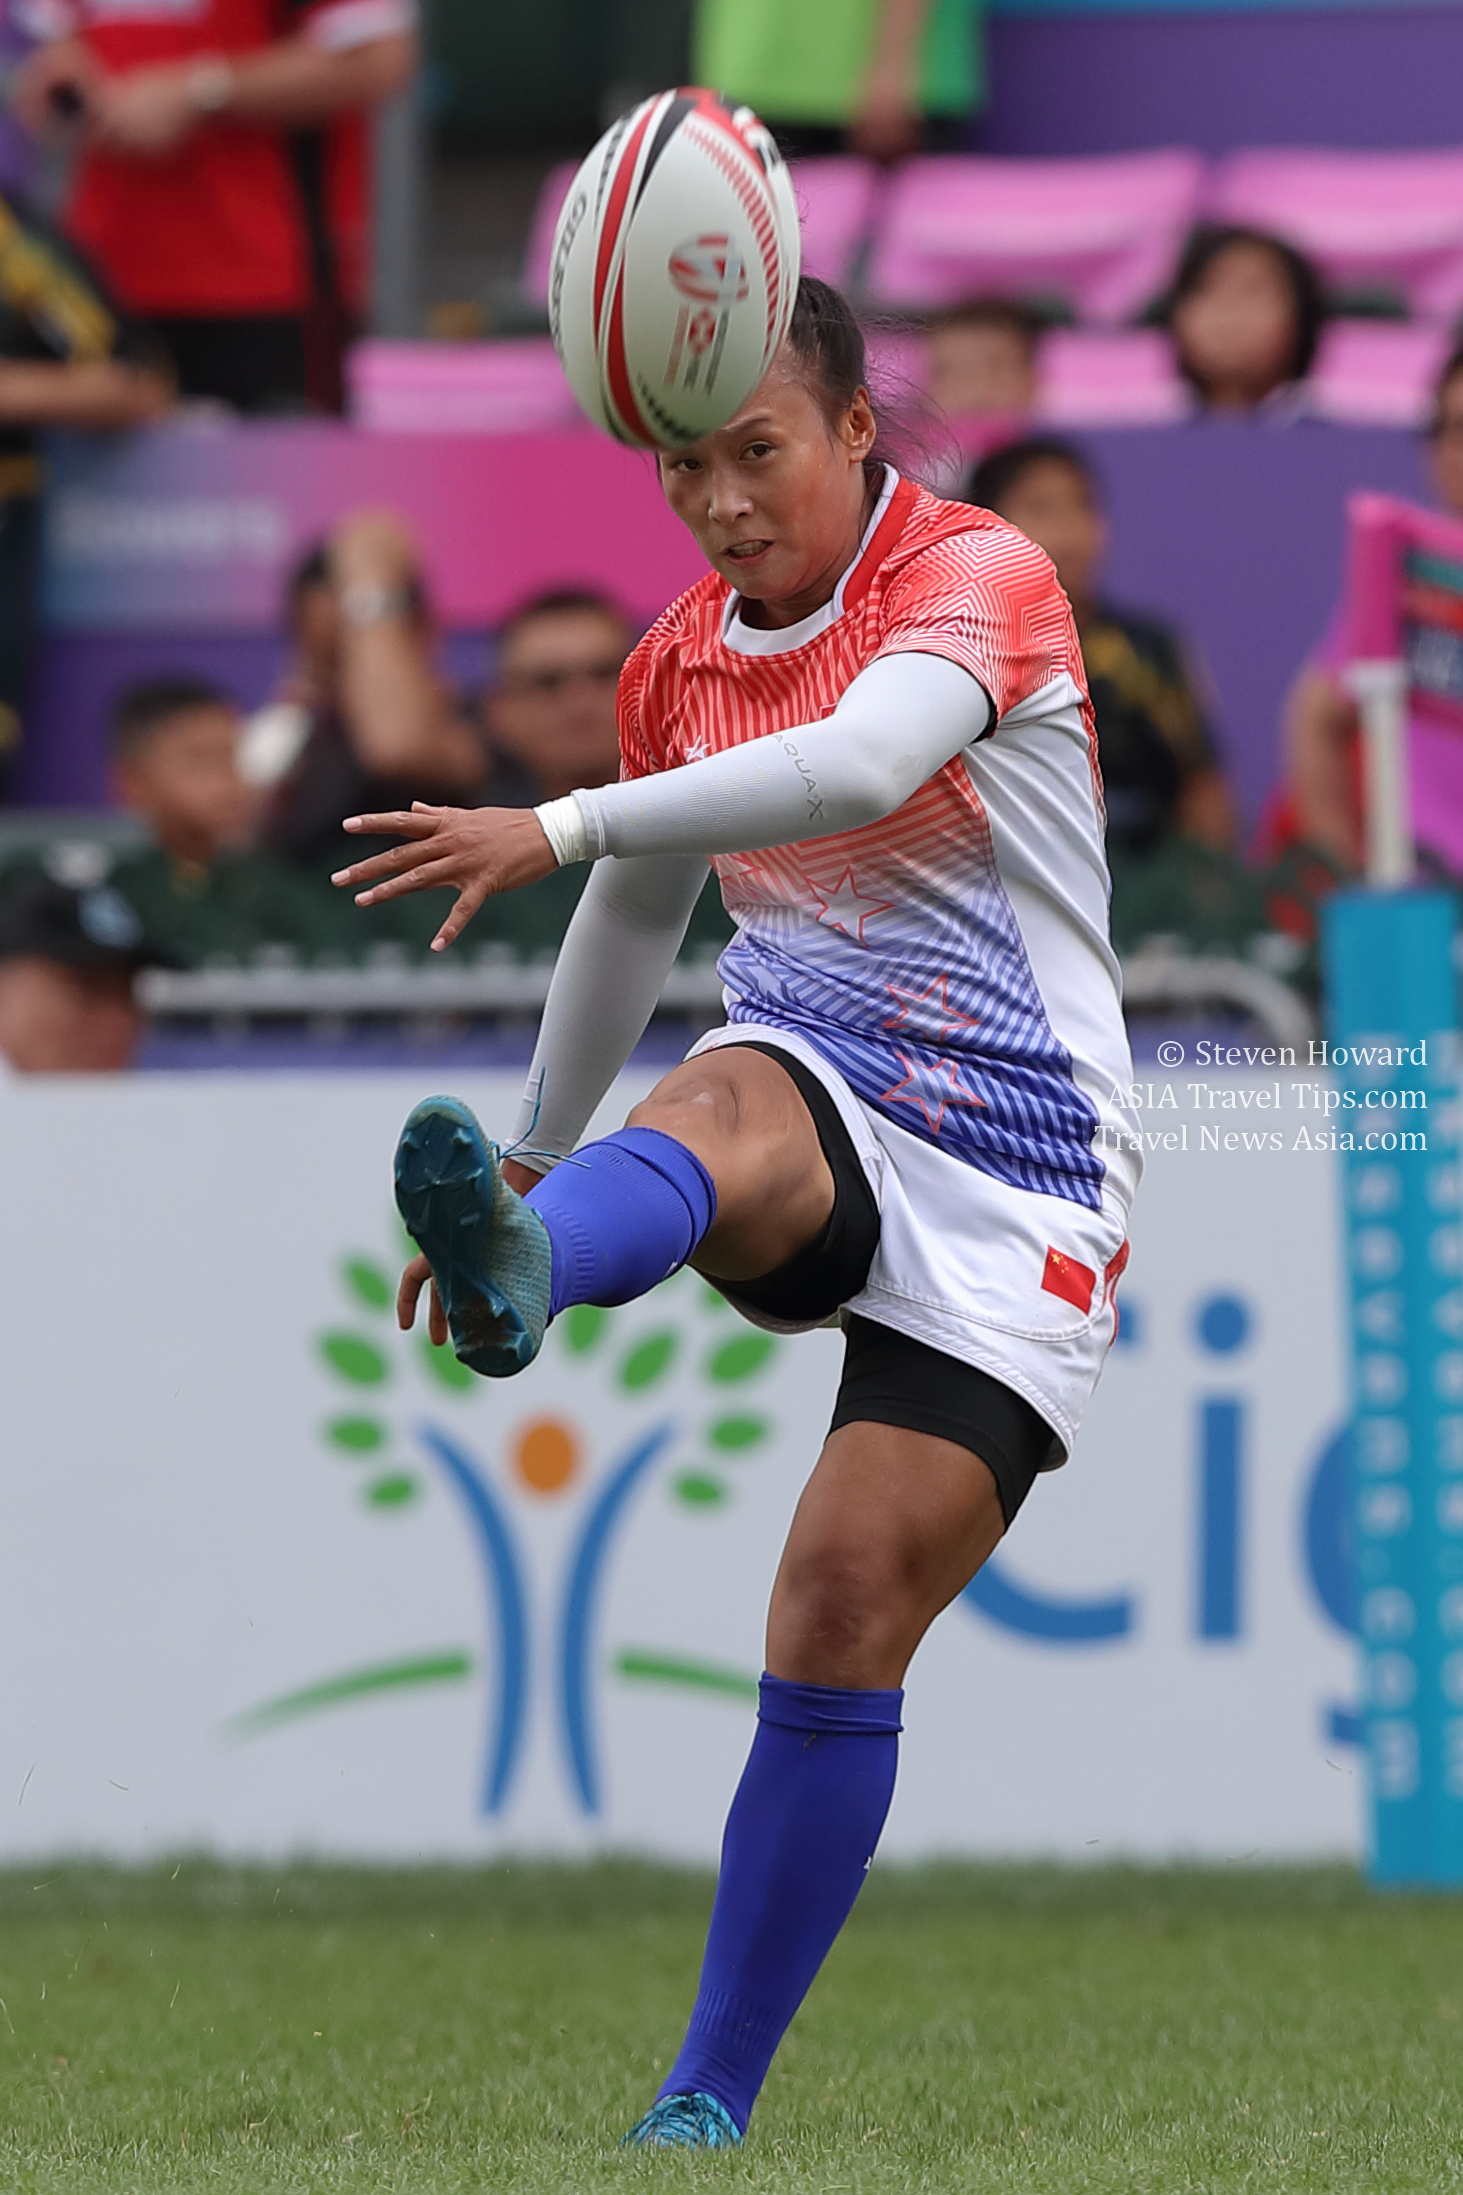 China women's rugby 7s player kicky for glory at the Cathay Pacific / HSBC Hong Kong Sevens in 2018. Picture by Steven Howard of TravelNewsAsia.com Click to enlarge.